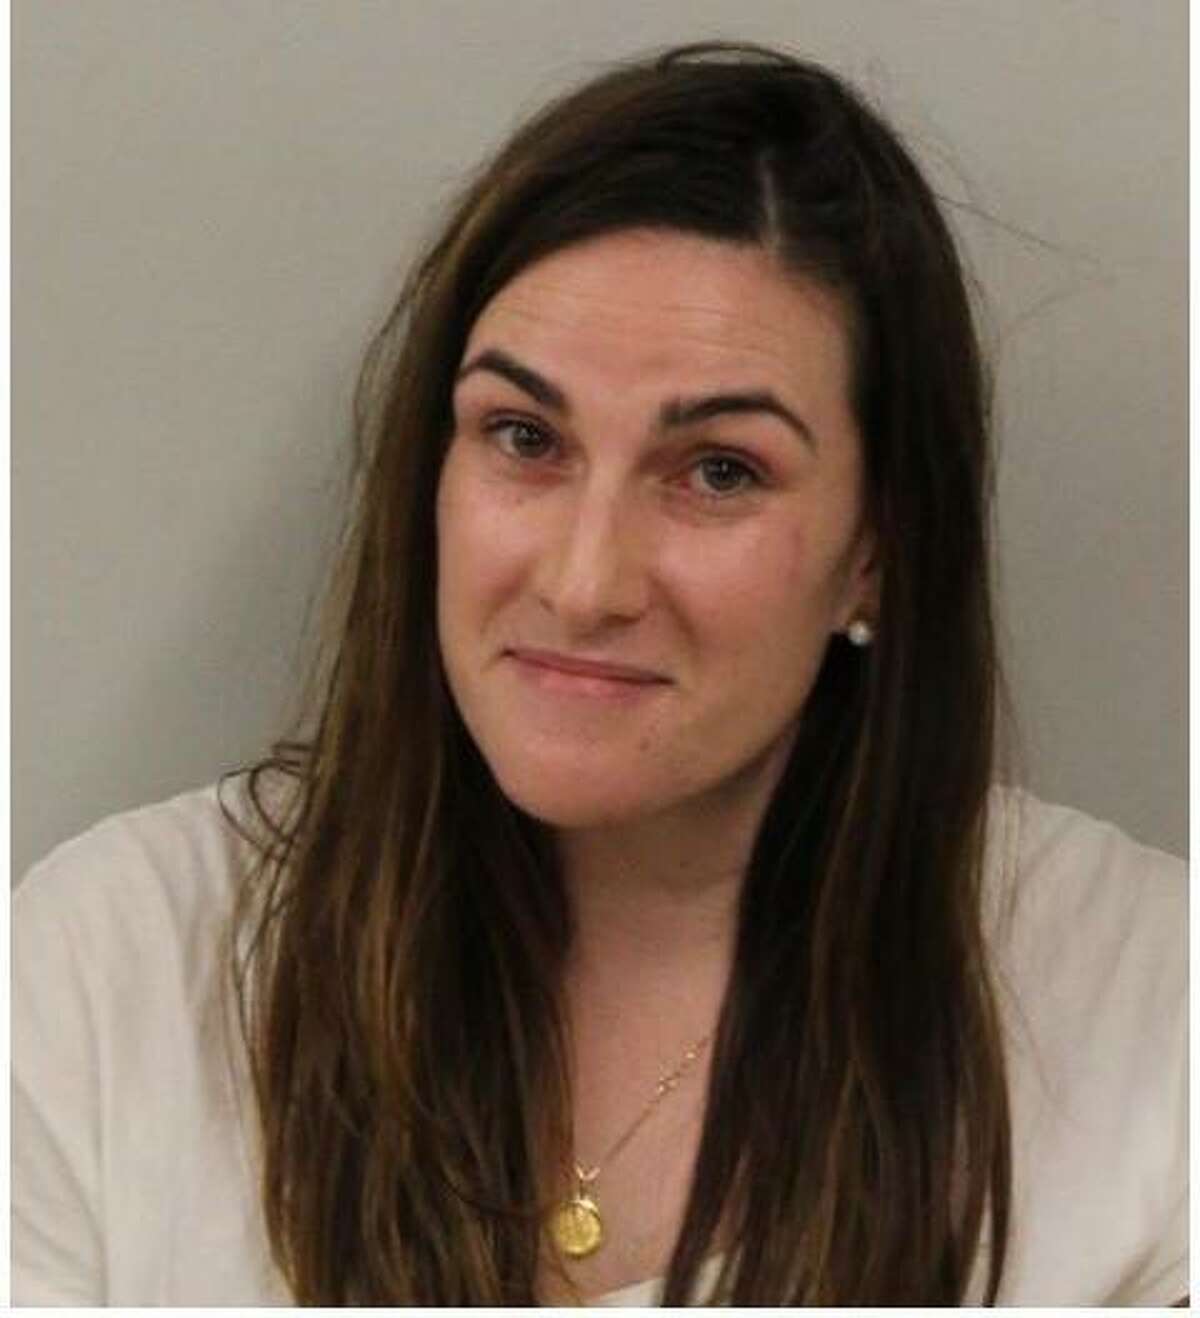 Arlington, VA resident Mary Baker was charged with operating under the influence of drugs/alcohol and evading responsibility in Westport on Dec. 27.